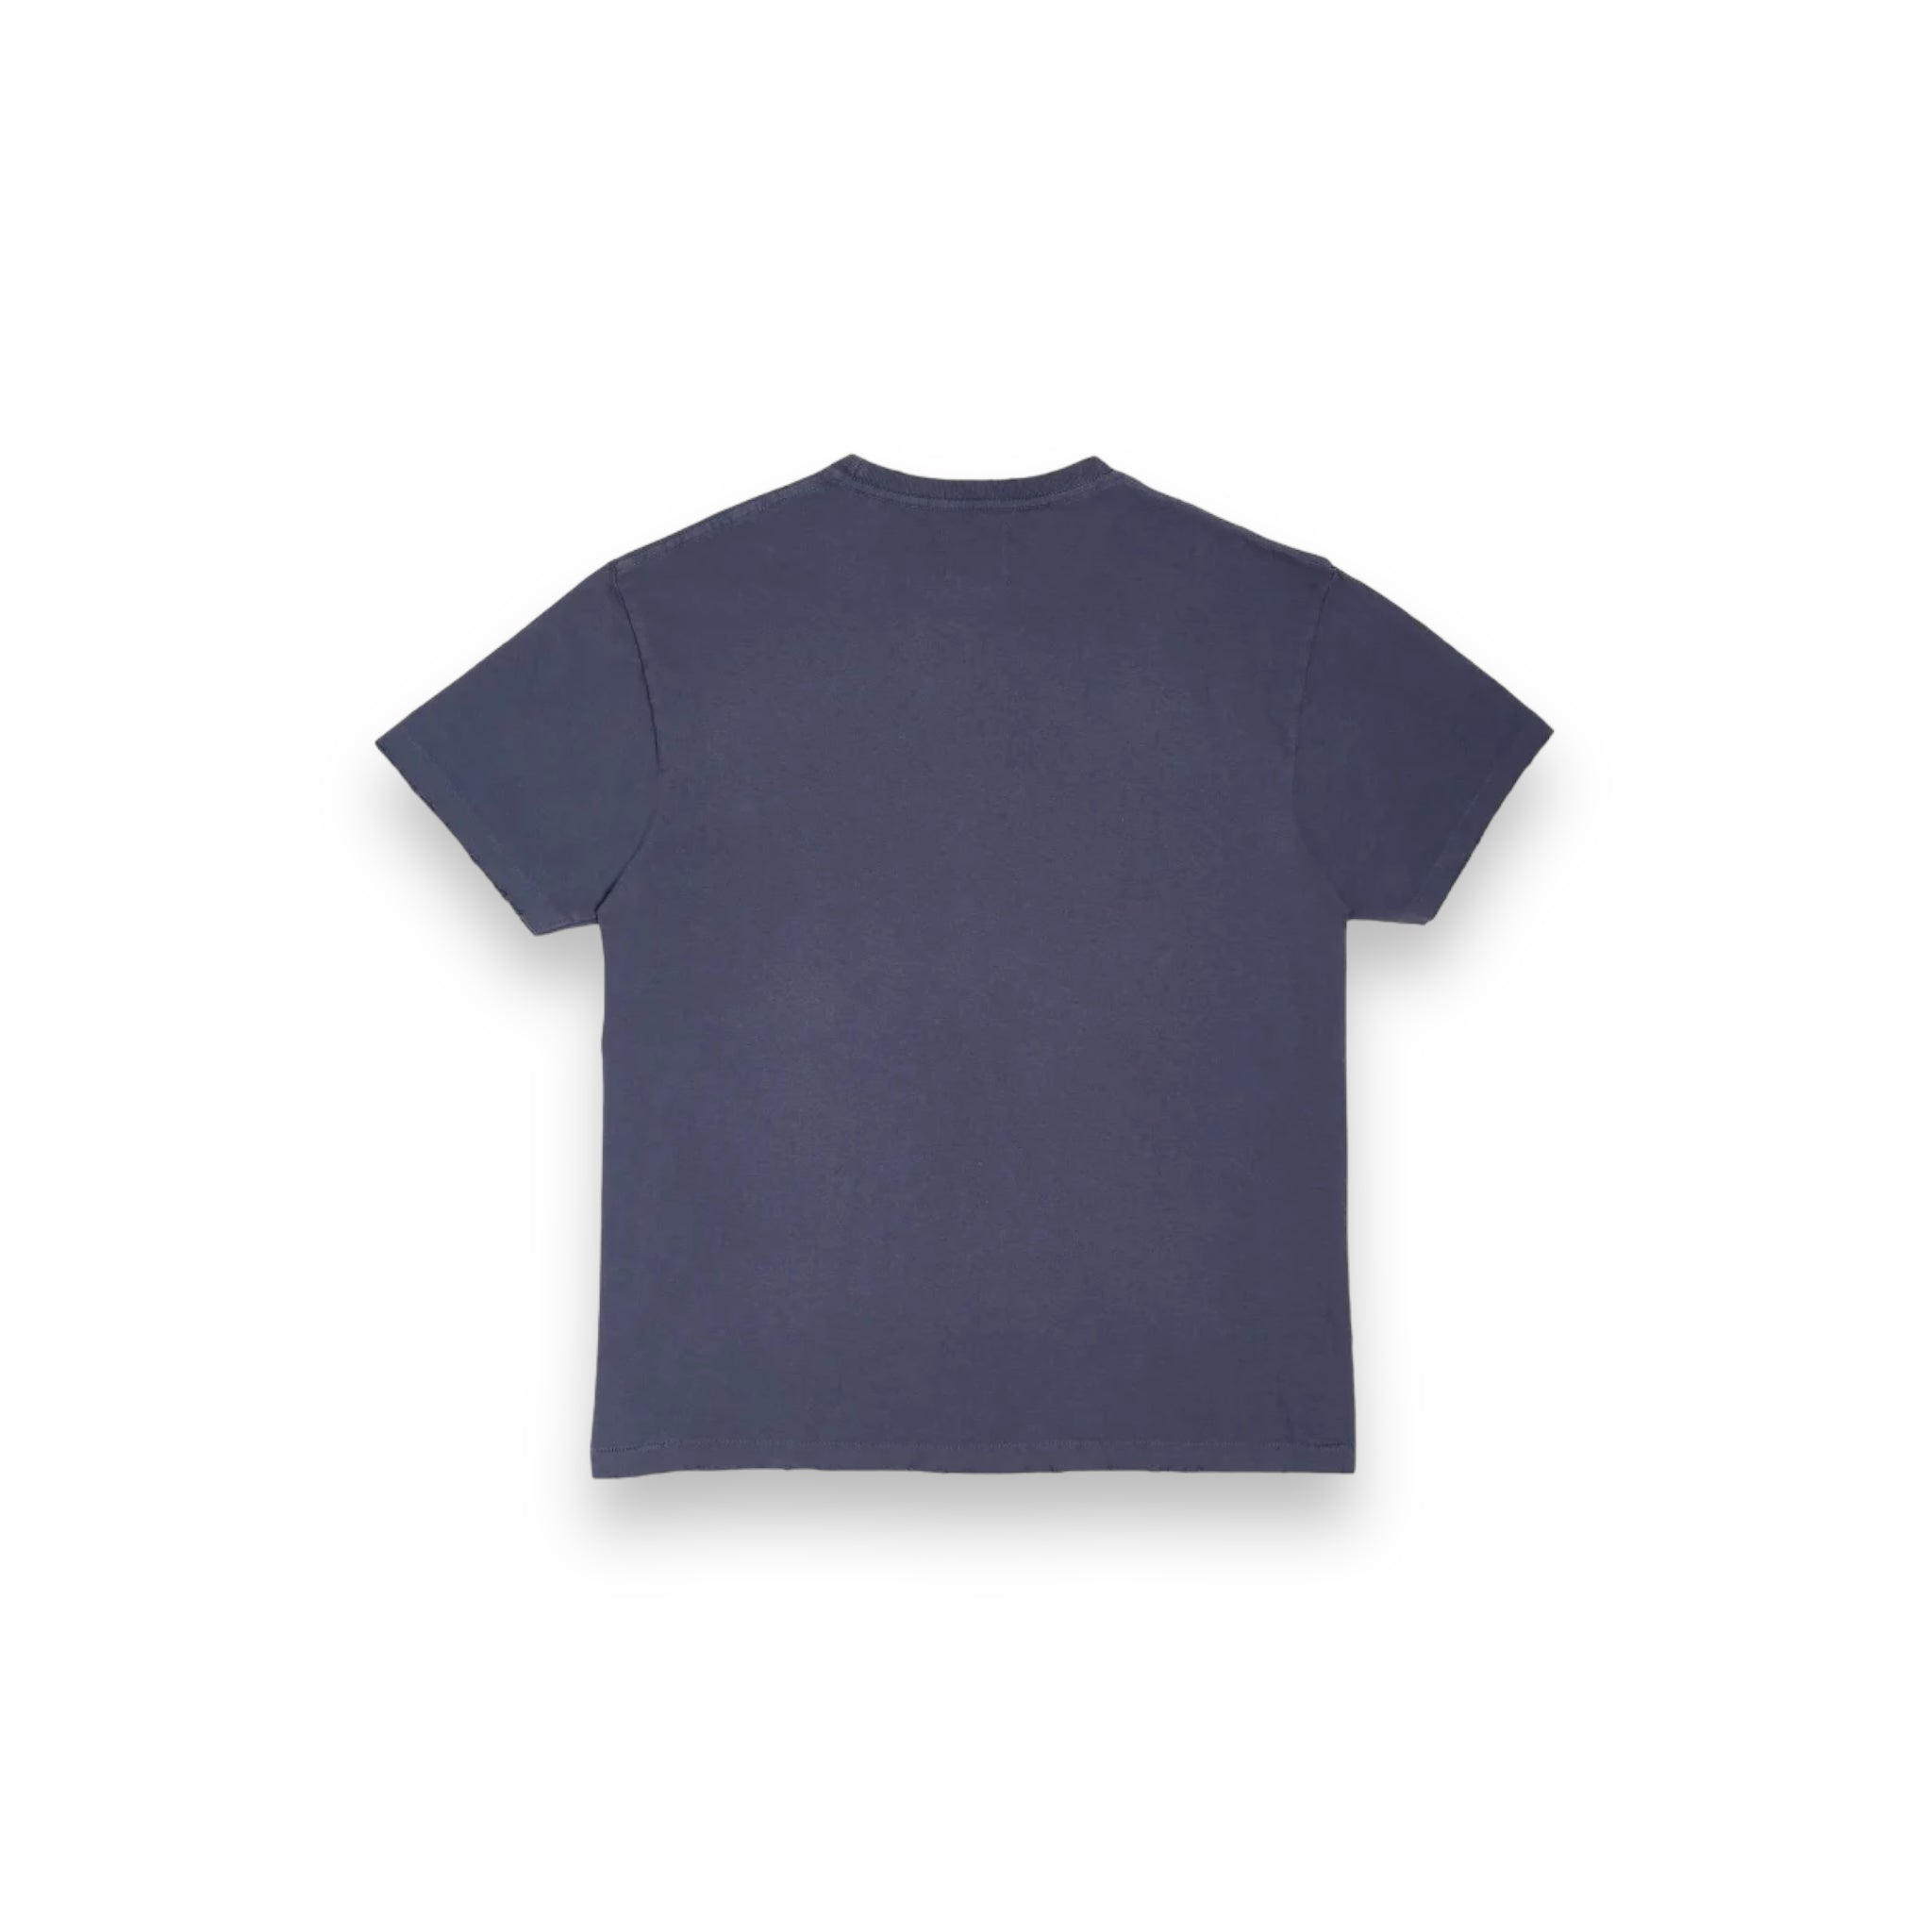 Gallery Dept Logo Hand Painted T-Shirt Navy